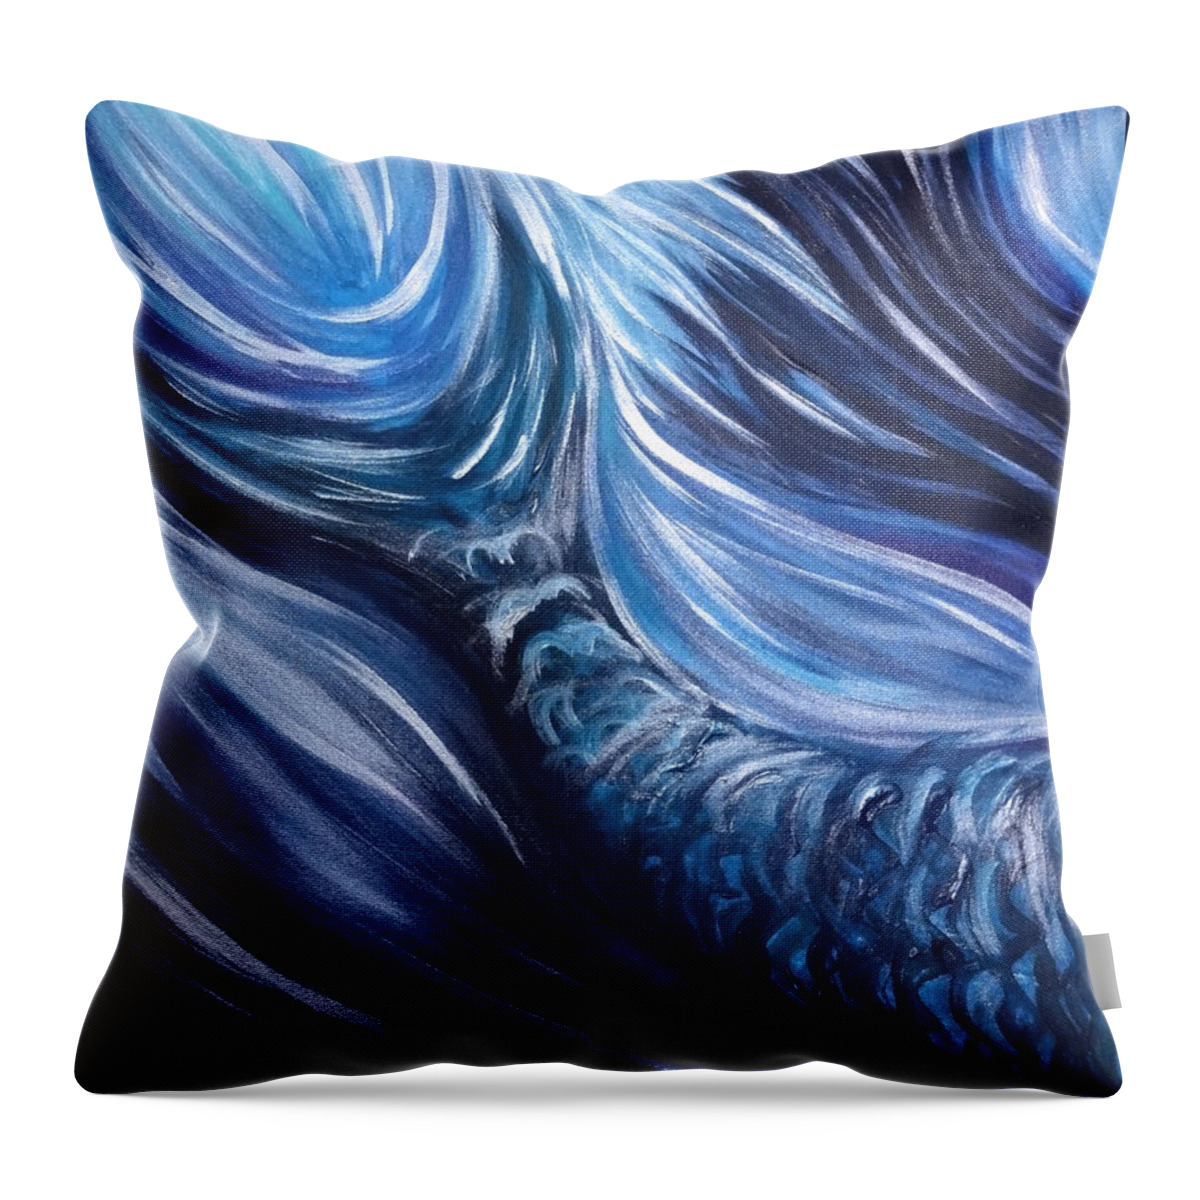 Sirena Throw Pillow featuring the painting Si Serena by Michelle Pier